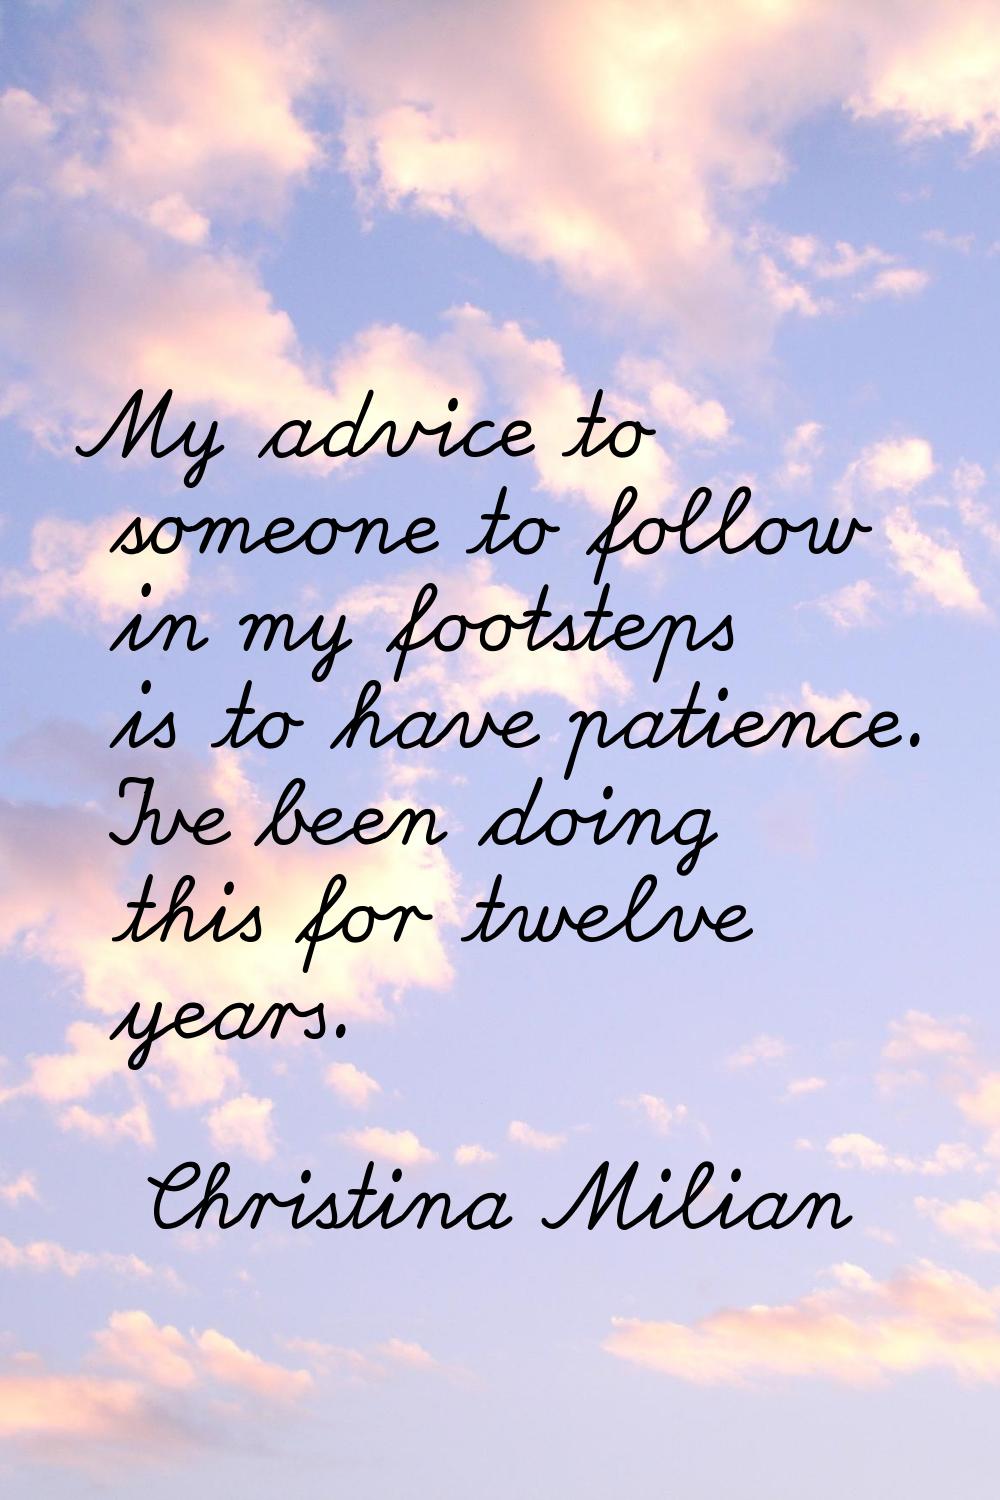 My advice to someone to follow in my footsteps is to have patience. I've been doing this for twelve